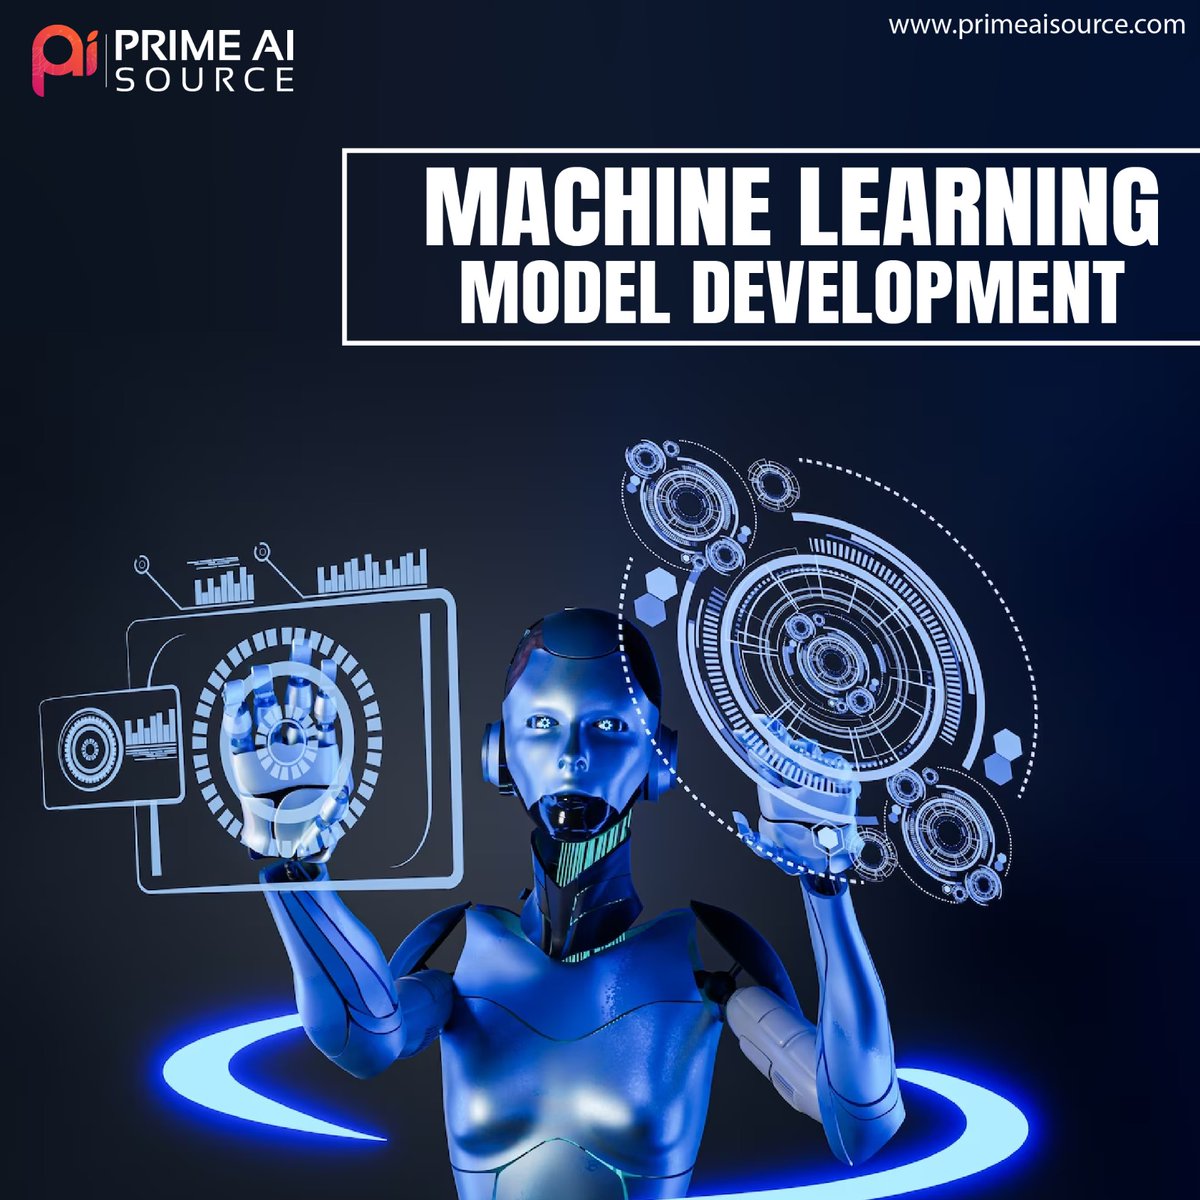 Unlock the power of data with our machine learning expertise! 📊✨
.
.
#machinelearning #primeaisource #modeldevelopment